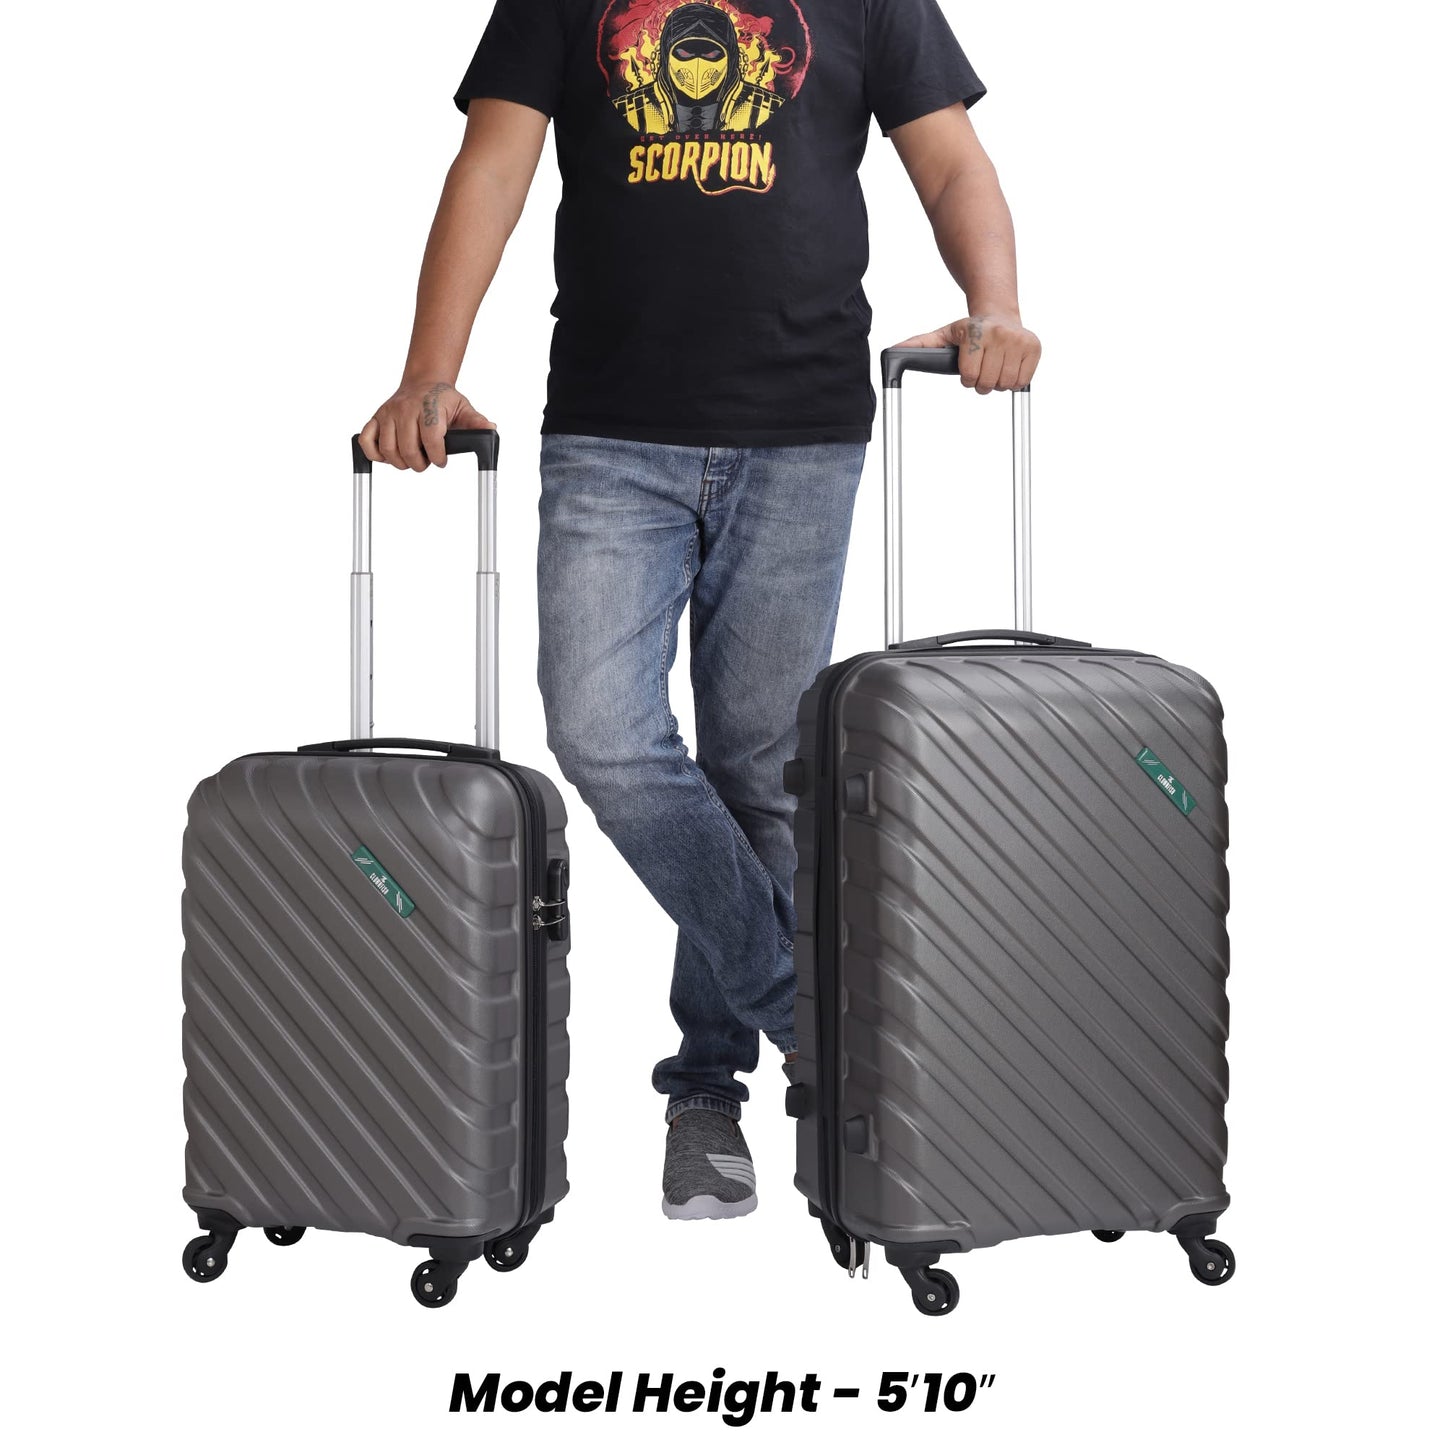 THE CLOWNFISH ABS Armstrong Combo Of 2 Luggage Abs Hard Case Suitcase Four Wheel 4 Spinner Wheels Trolley Bags- Copper Silver (Medium, Small-54 Cm), Black, 65 CM & 54 CM